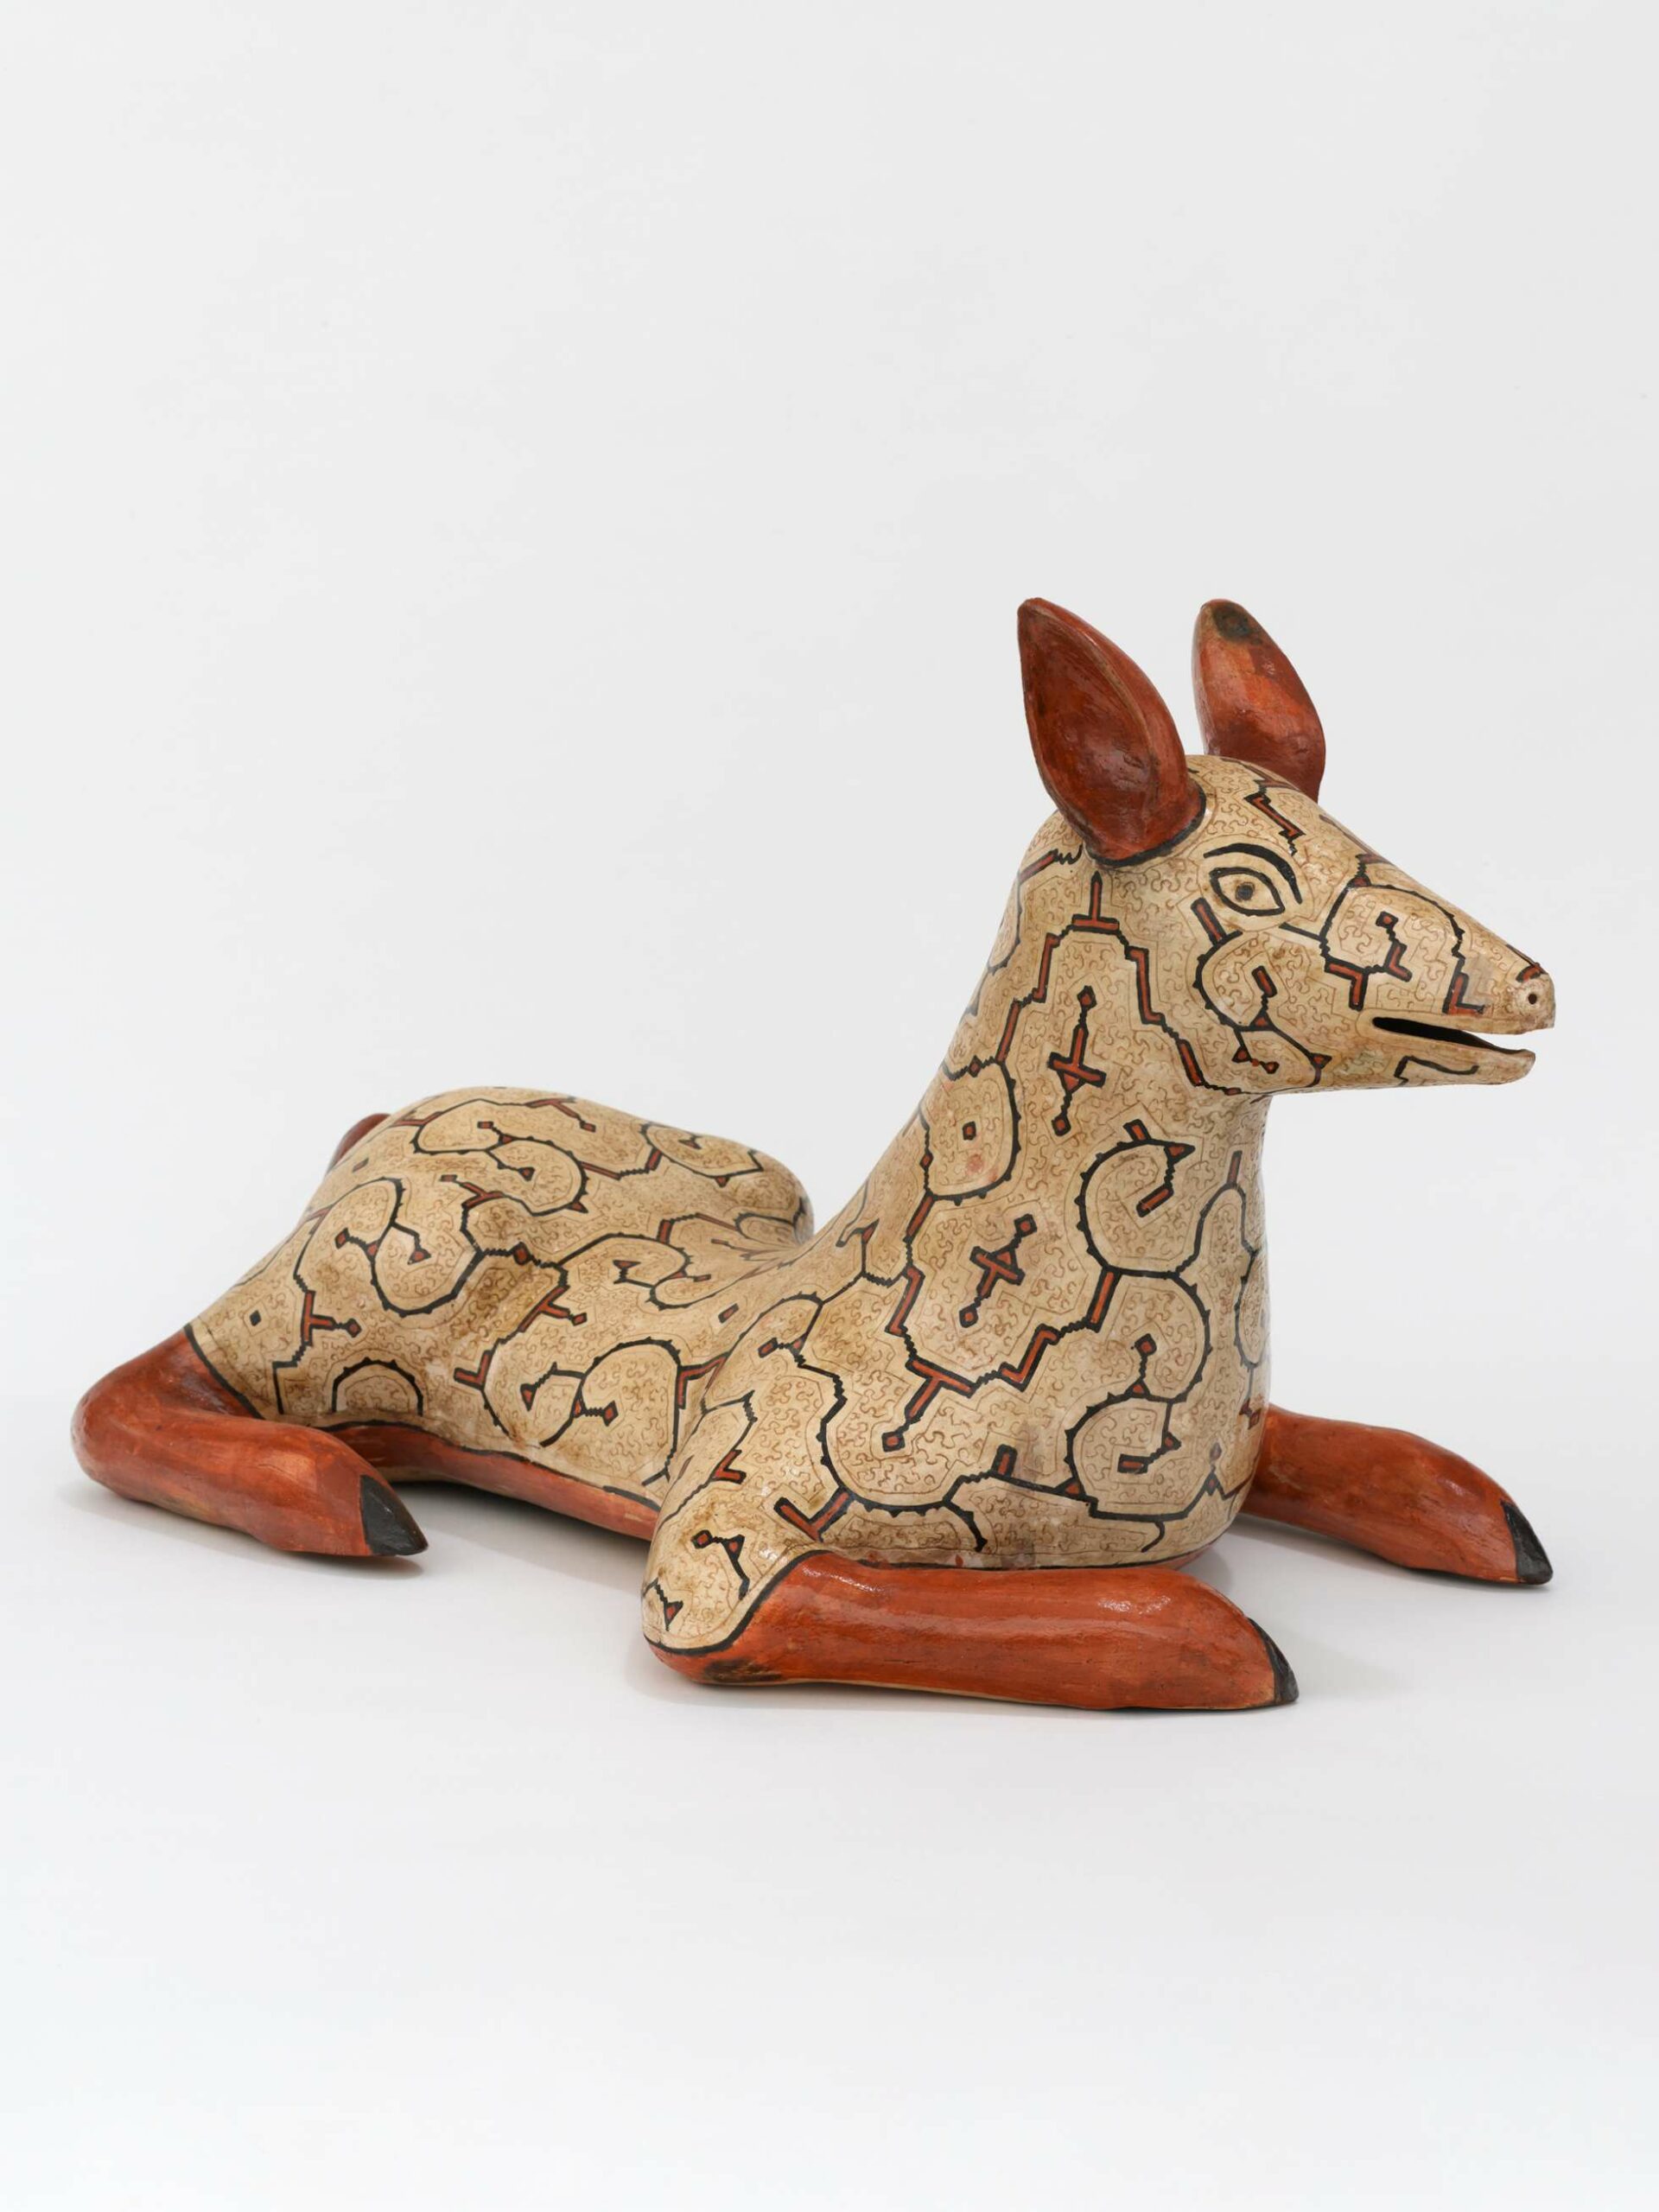 A ceramic sculpture of a deer lying on its belly, its four legs splayed. The deer has burnt red legs and ears, and it's body, rendered in beige, is covered in brown geometric patterns.